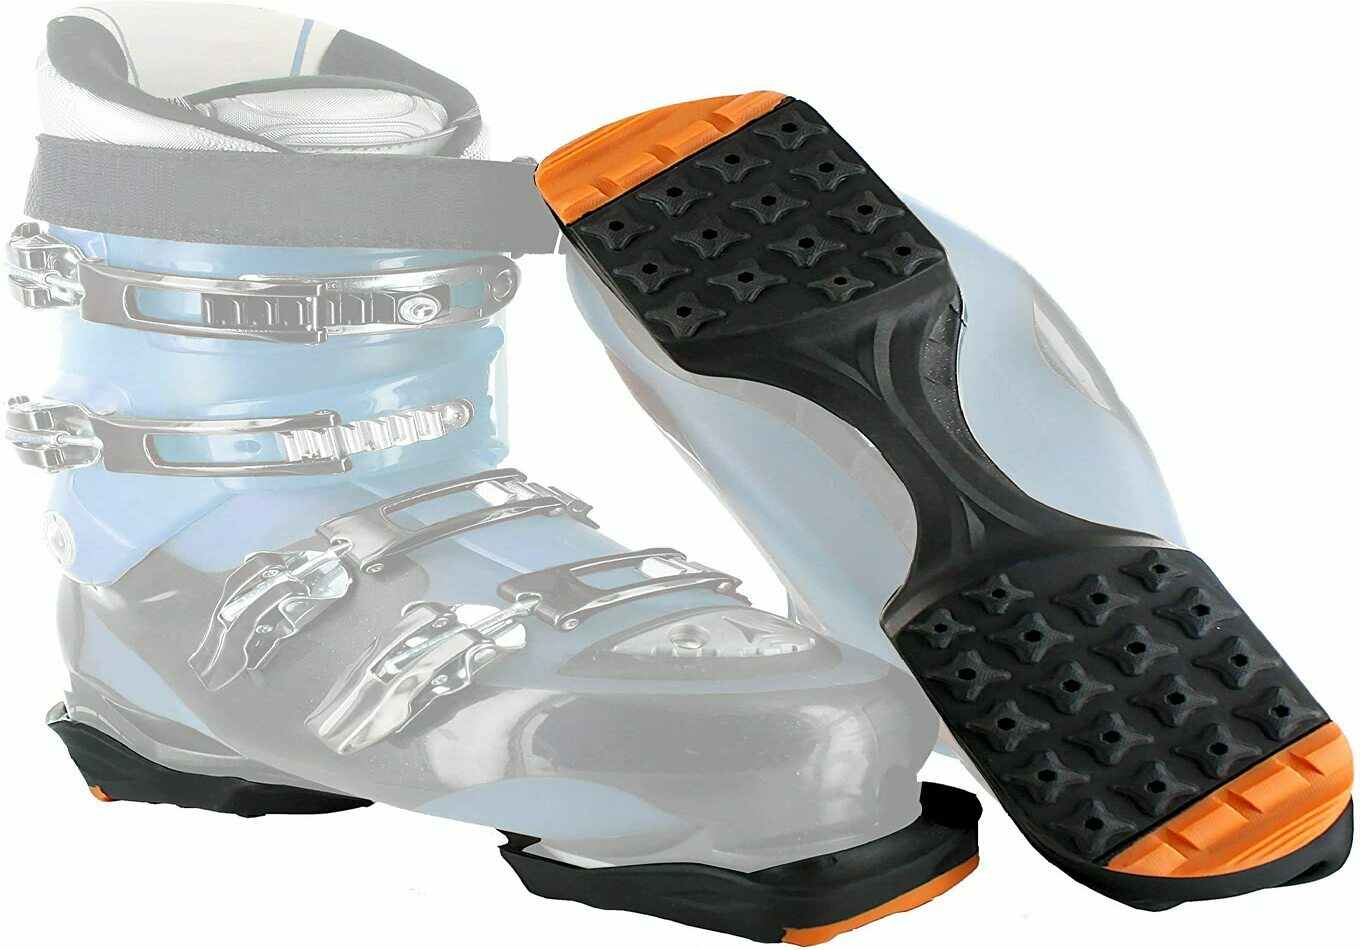 Yaktrax SkiTrax Traction and Protection Cleats